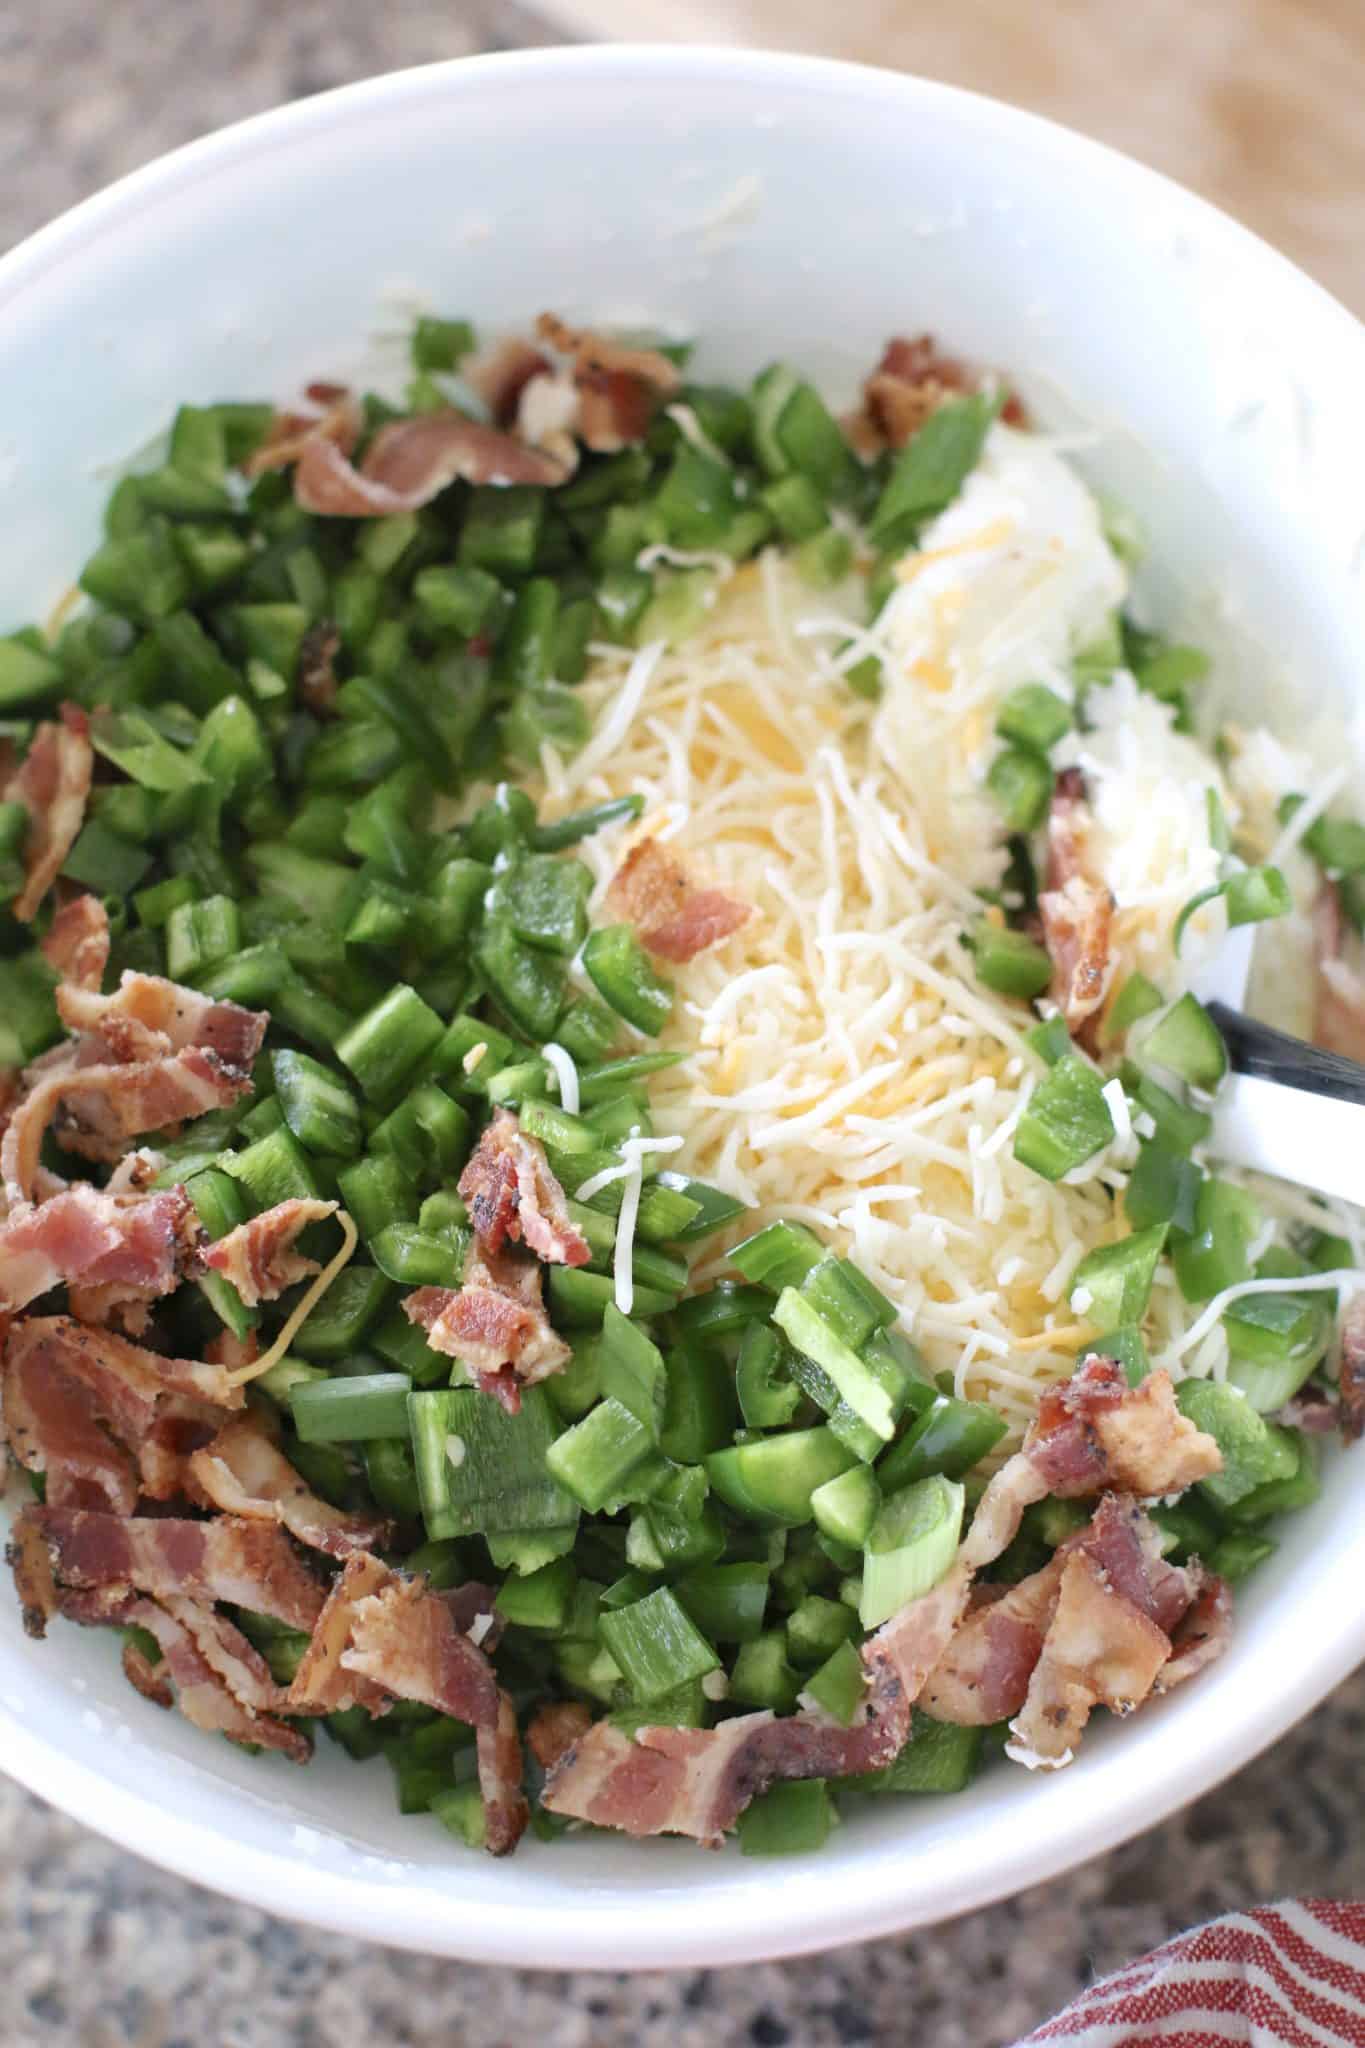 cream cheese, sour cream, bacon and shredded cheese in a bowl.